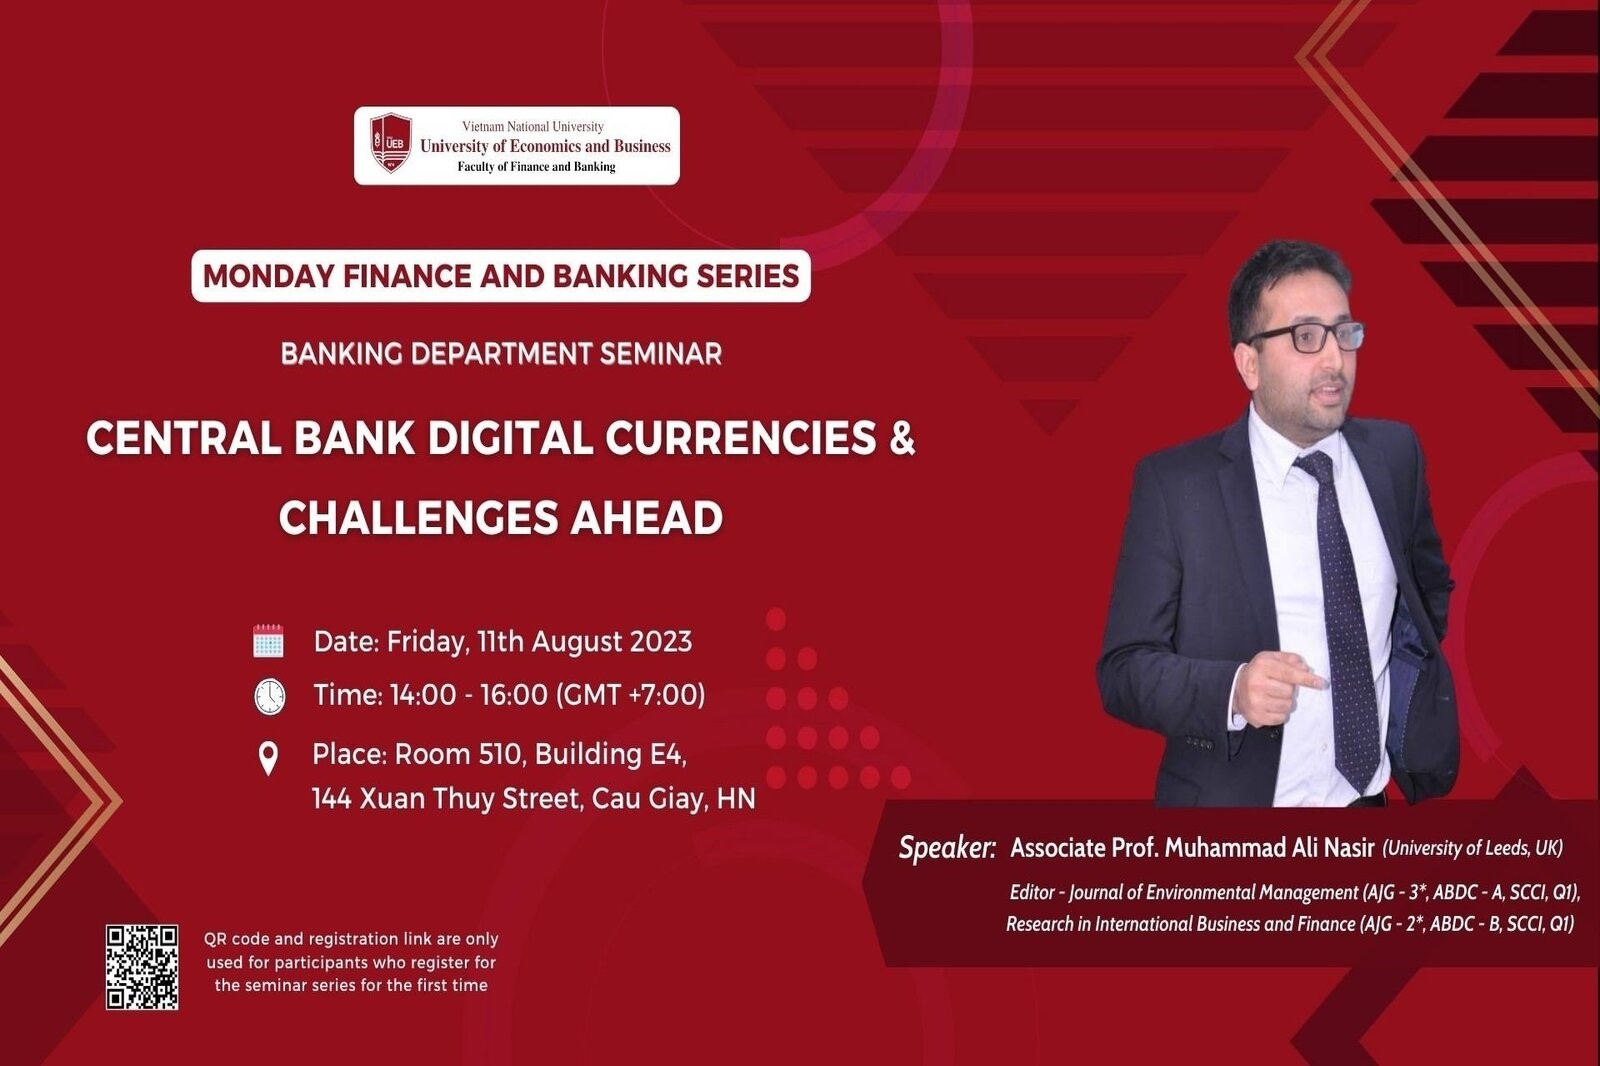 [RECAP] Monday Finance and Banking Series tháng 8/2023 - Central Bank Digital Currencies & Challenges Ahead